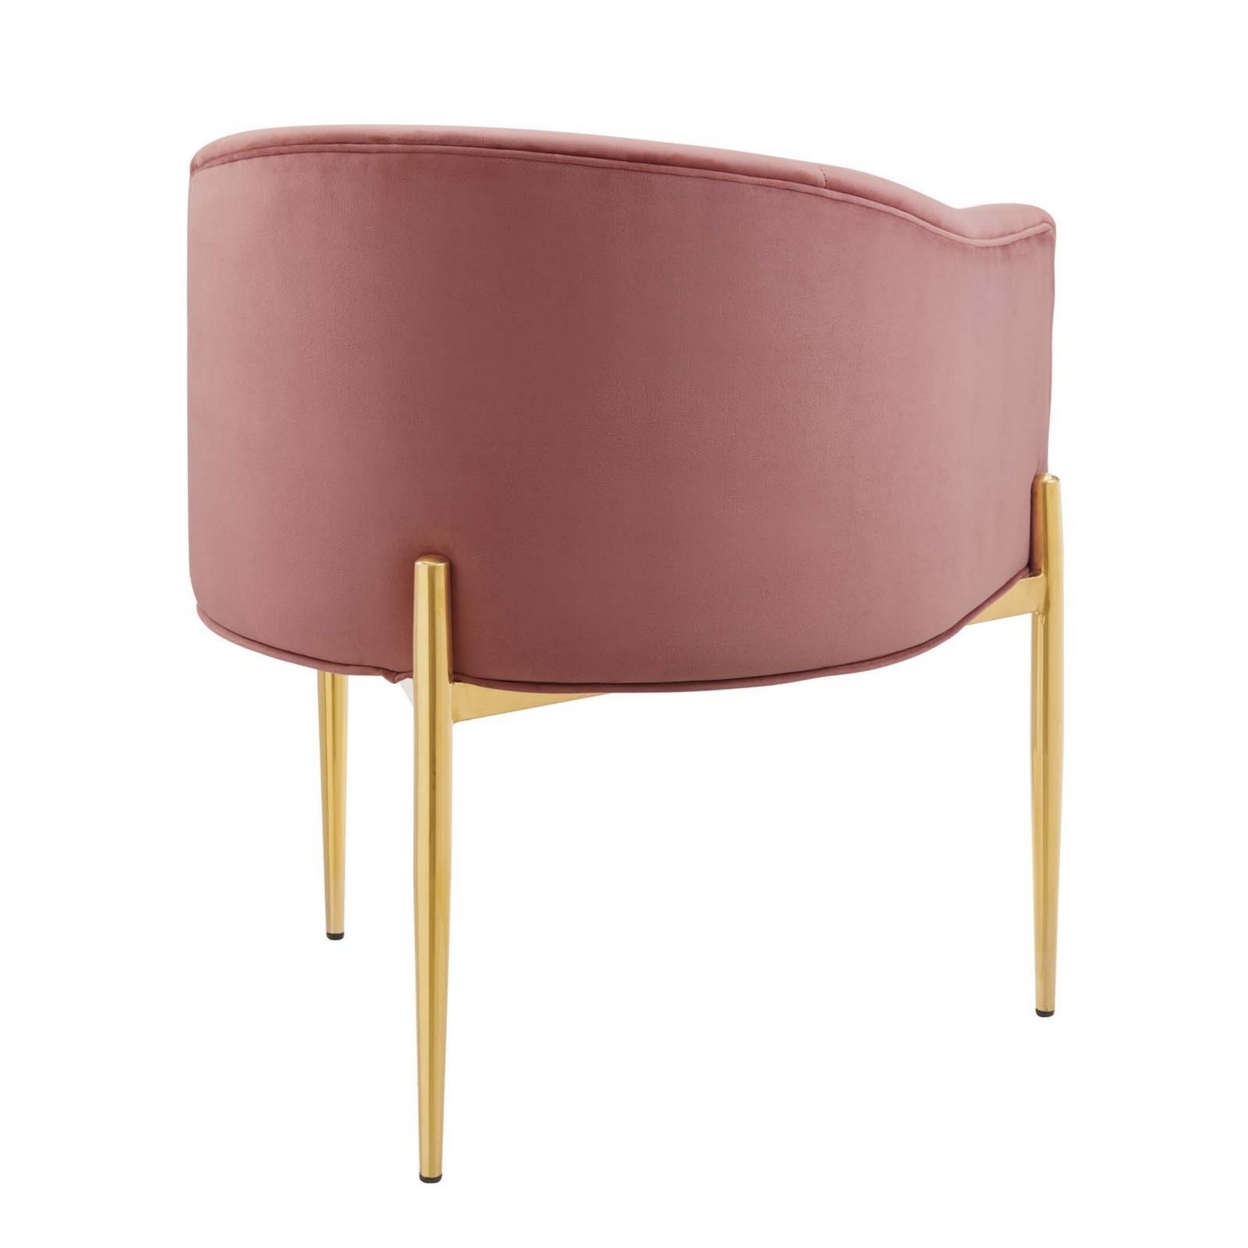 Savour Tufted Performance Velvet Accent Chair, Dusty Rose